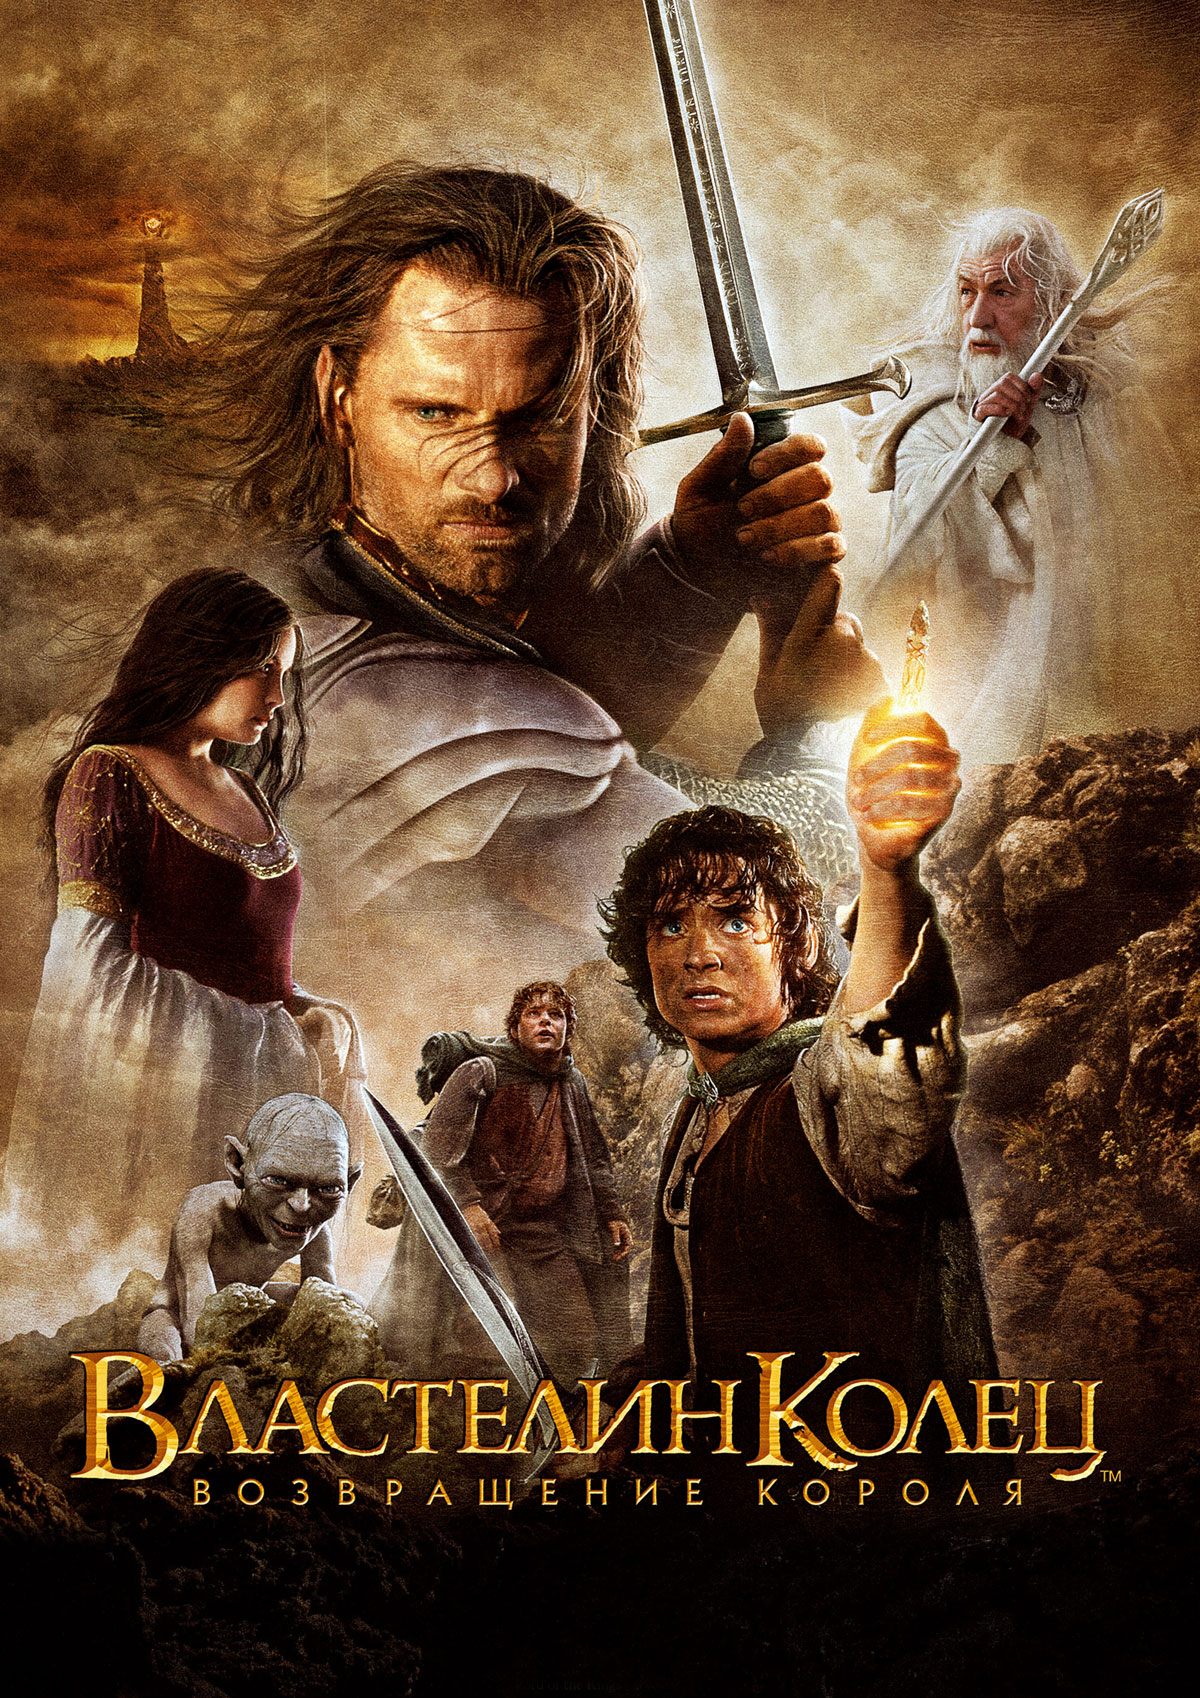 The Lord of the Rings the Return of the King poster